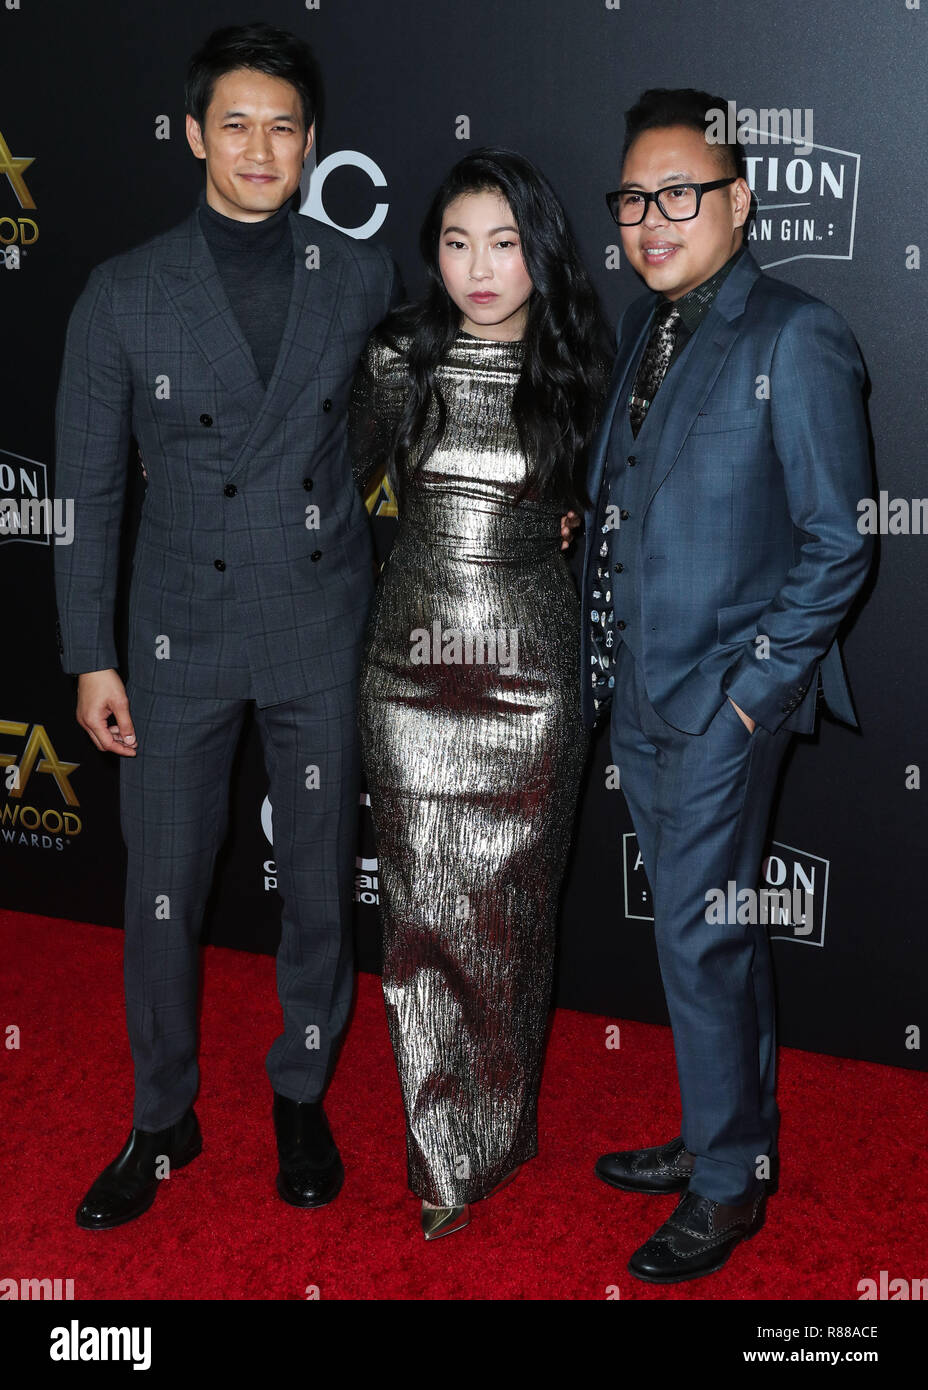 BEVERLY HILLS, LOS ANGELES, CA, USA - NOVEMBER 04: Harry Shum Jr., Awkwafina, Nico Santos at the 22nd Annual Hollywood Film Awards held at The Beverly Hilton Hotel on November 4, 2018 in Beverly Hills, Los Angeles, California, United States. (Photo by Xavier Collin/Image Press Agency) Stock Photo